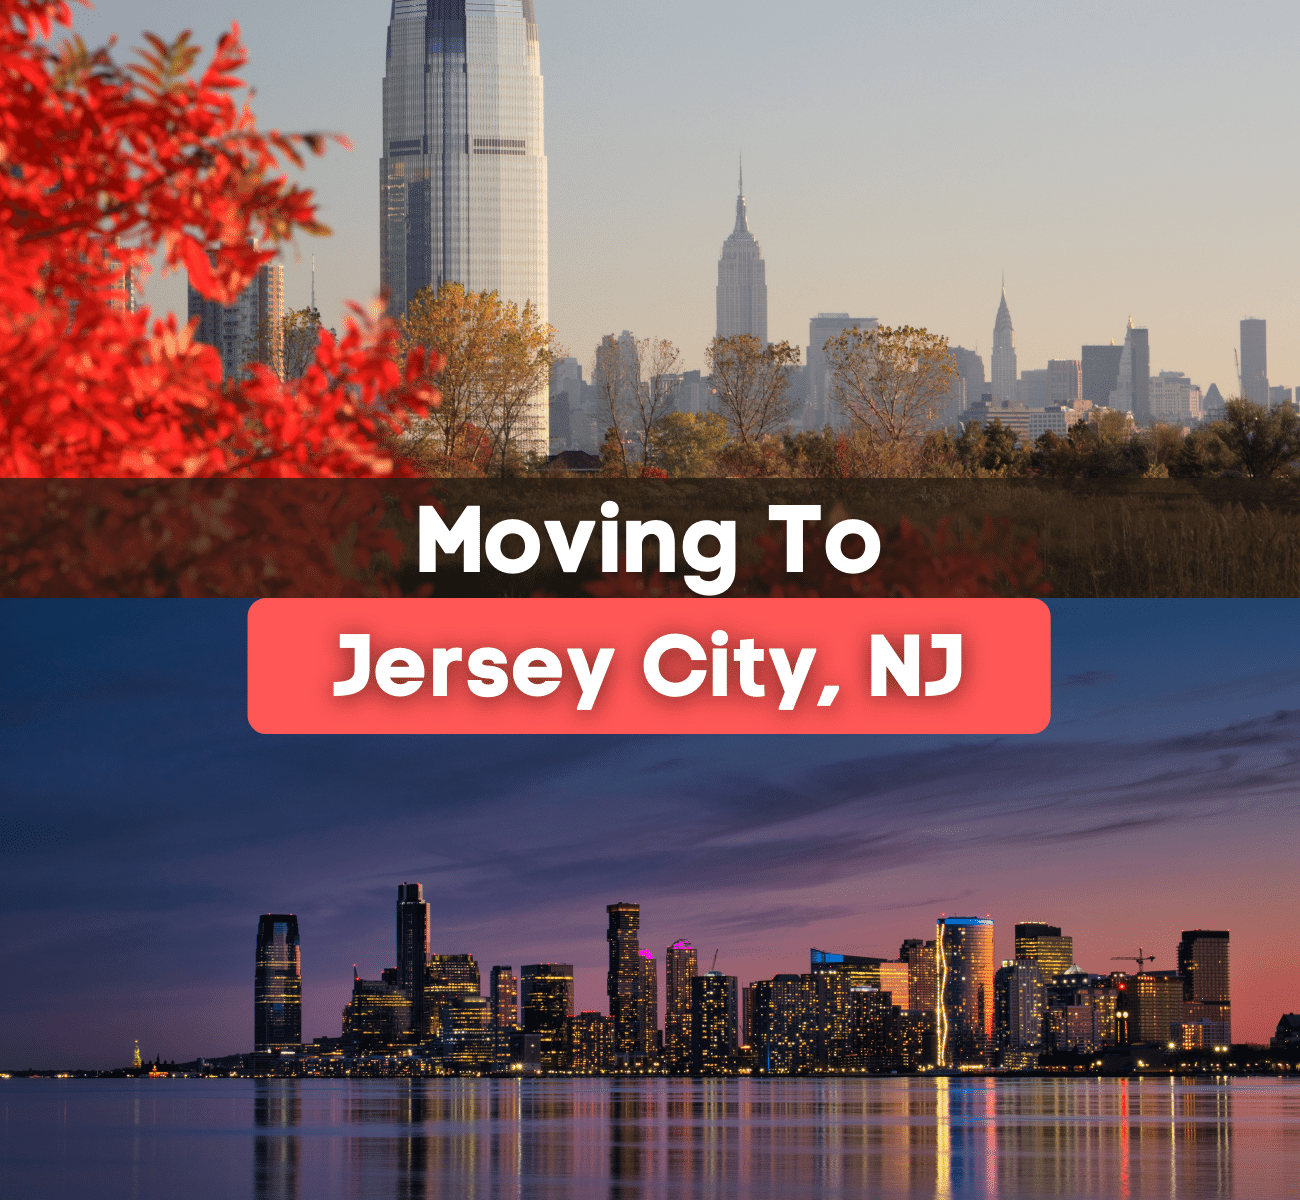 Dokter lila verdacht 7 Things to Know BEFORE Moving to Jersey City, NJ